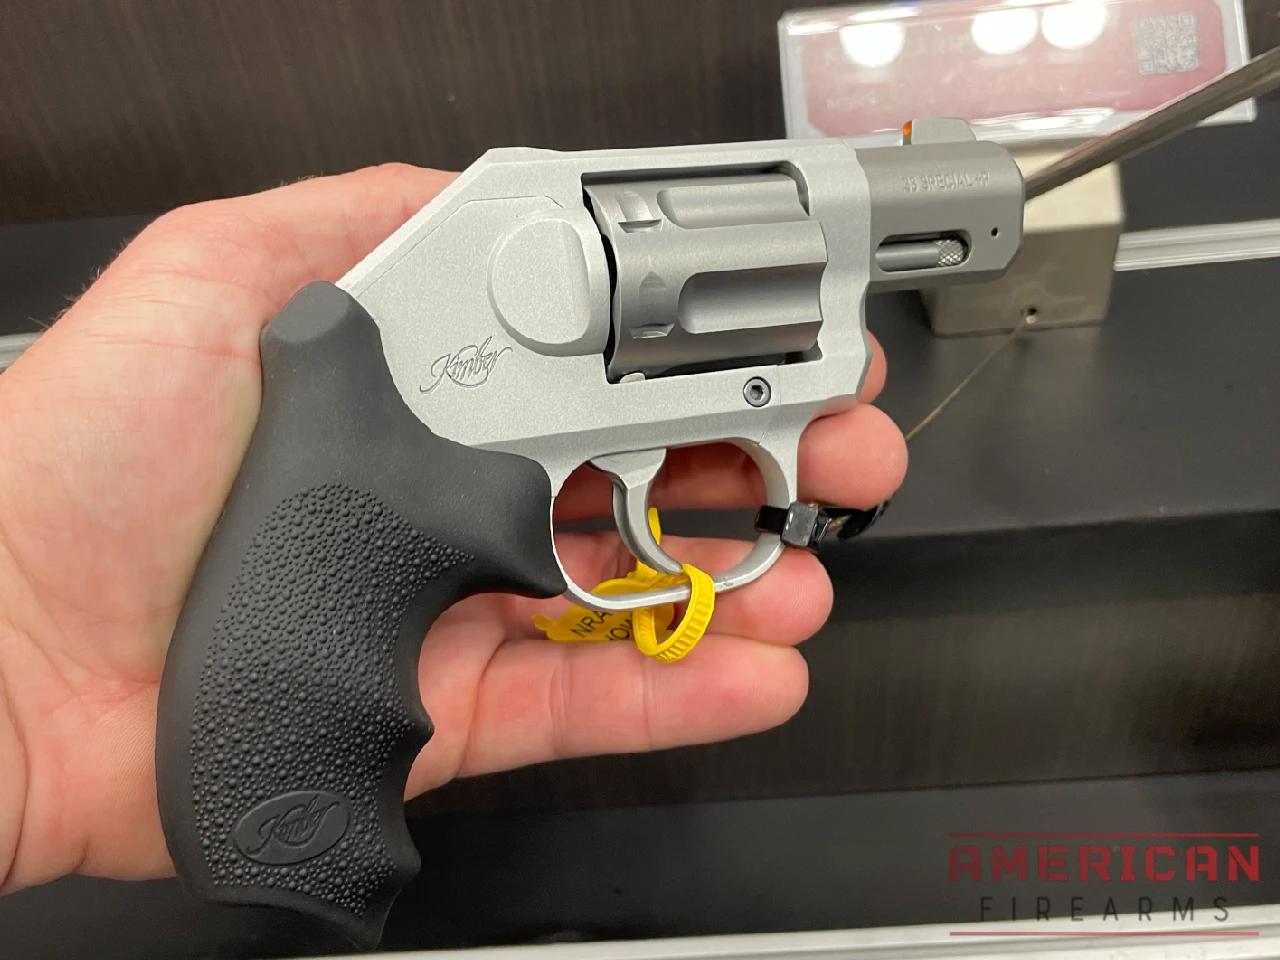 The K6XS Carry is a 15-ounce .38 is set up to compete against Colt's modern Cobra series and S&W's J-frames.